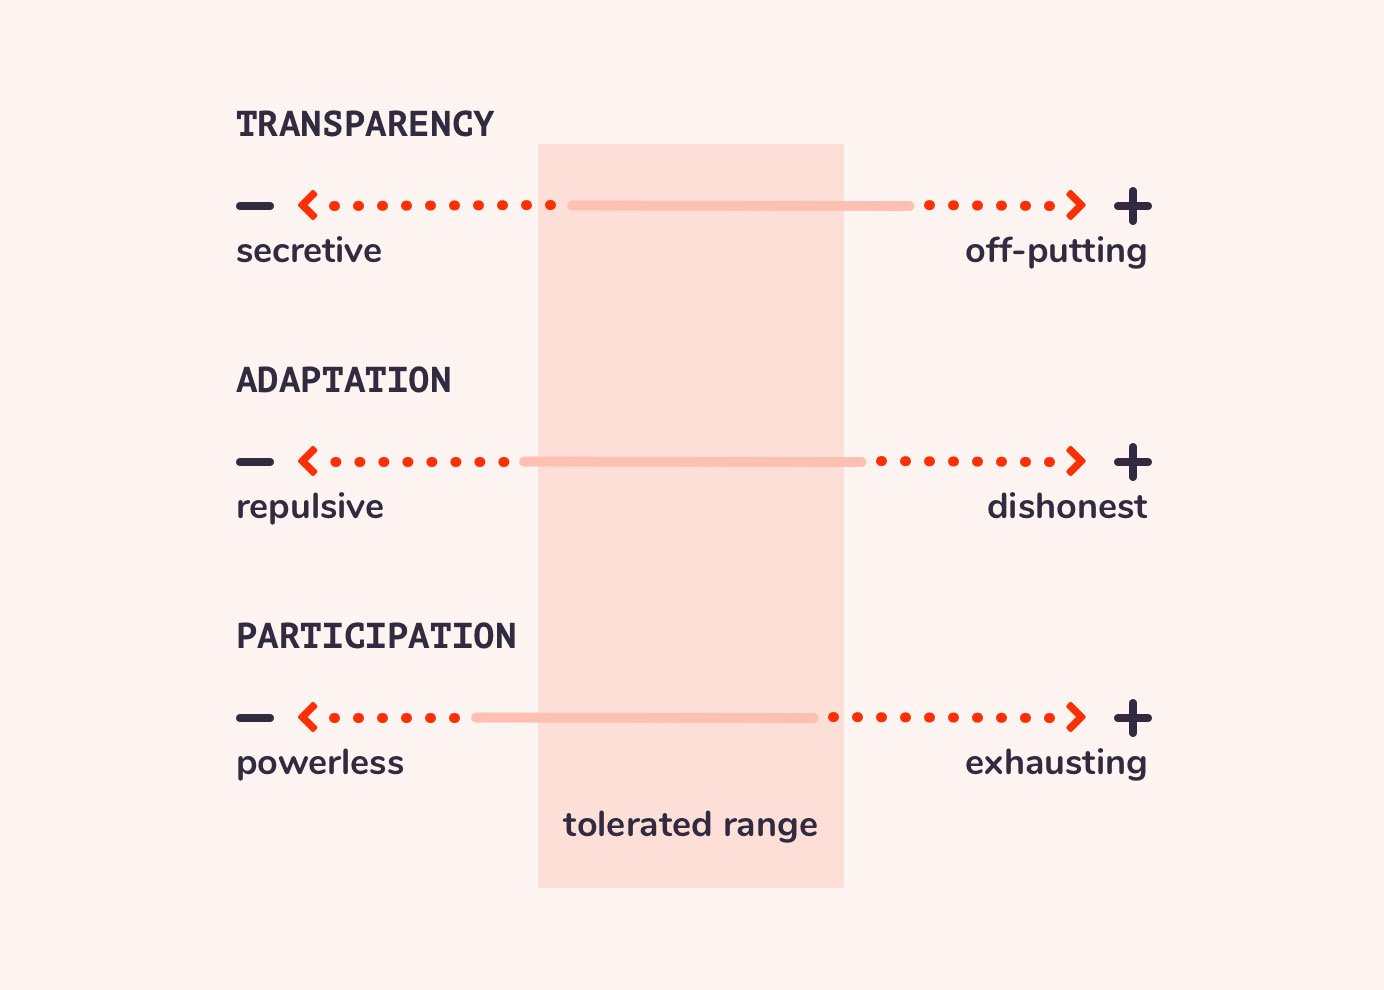 Our research-framework based on the three scales of transparency, adaptation and participation